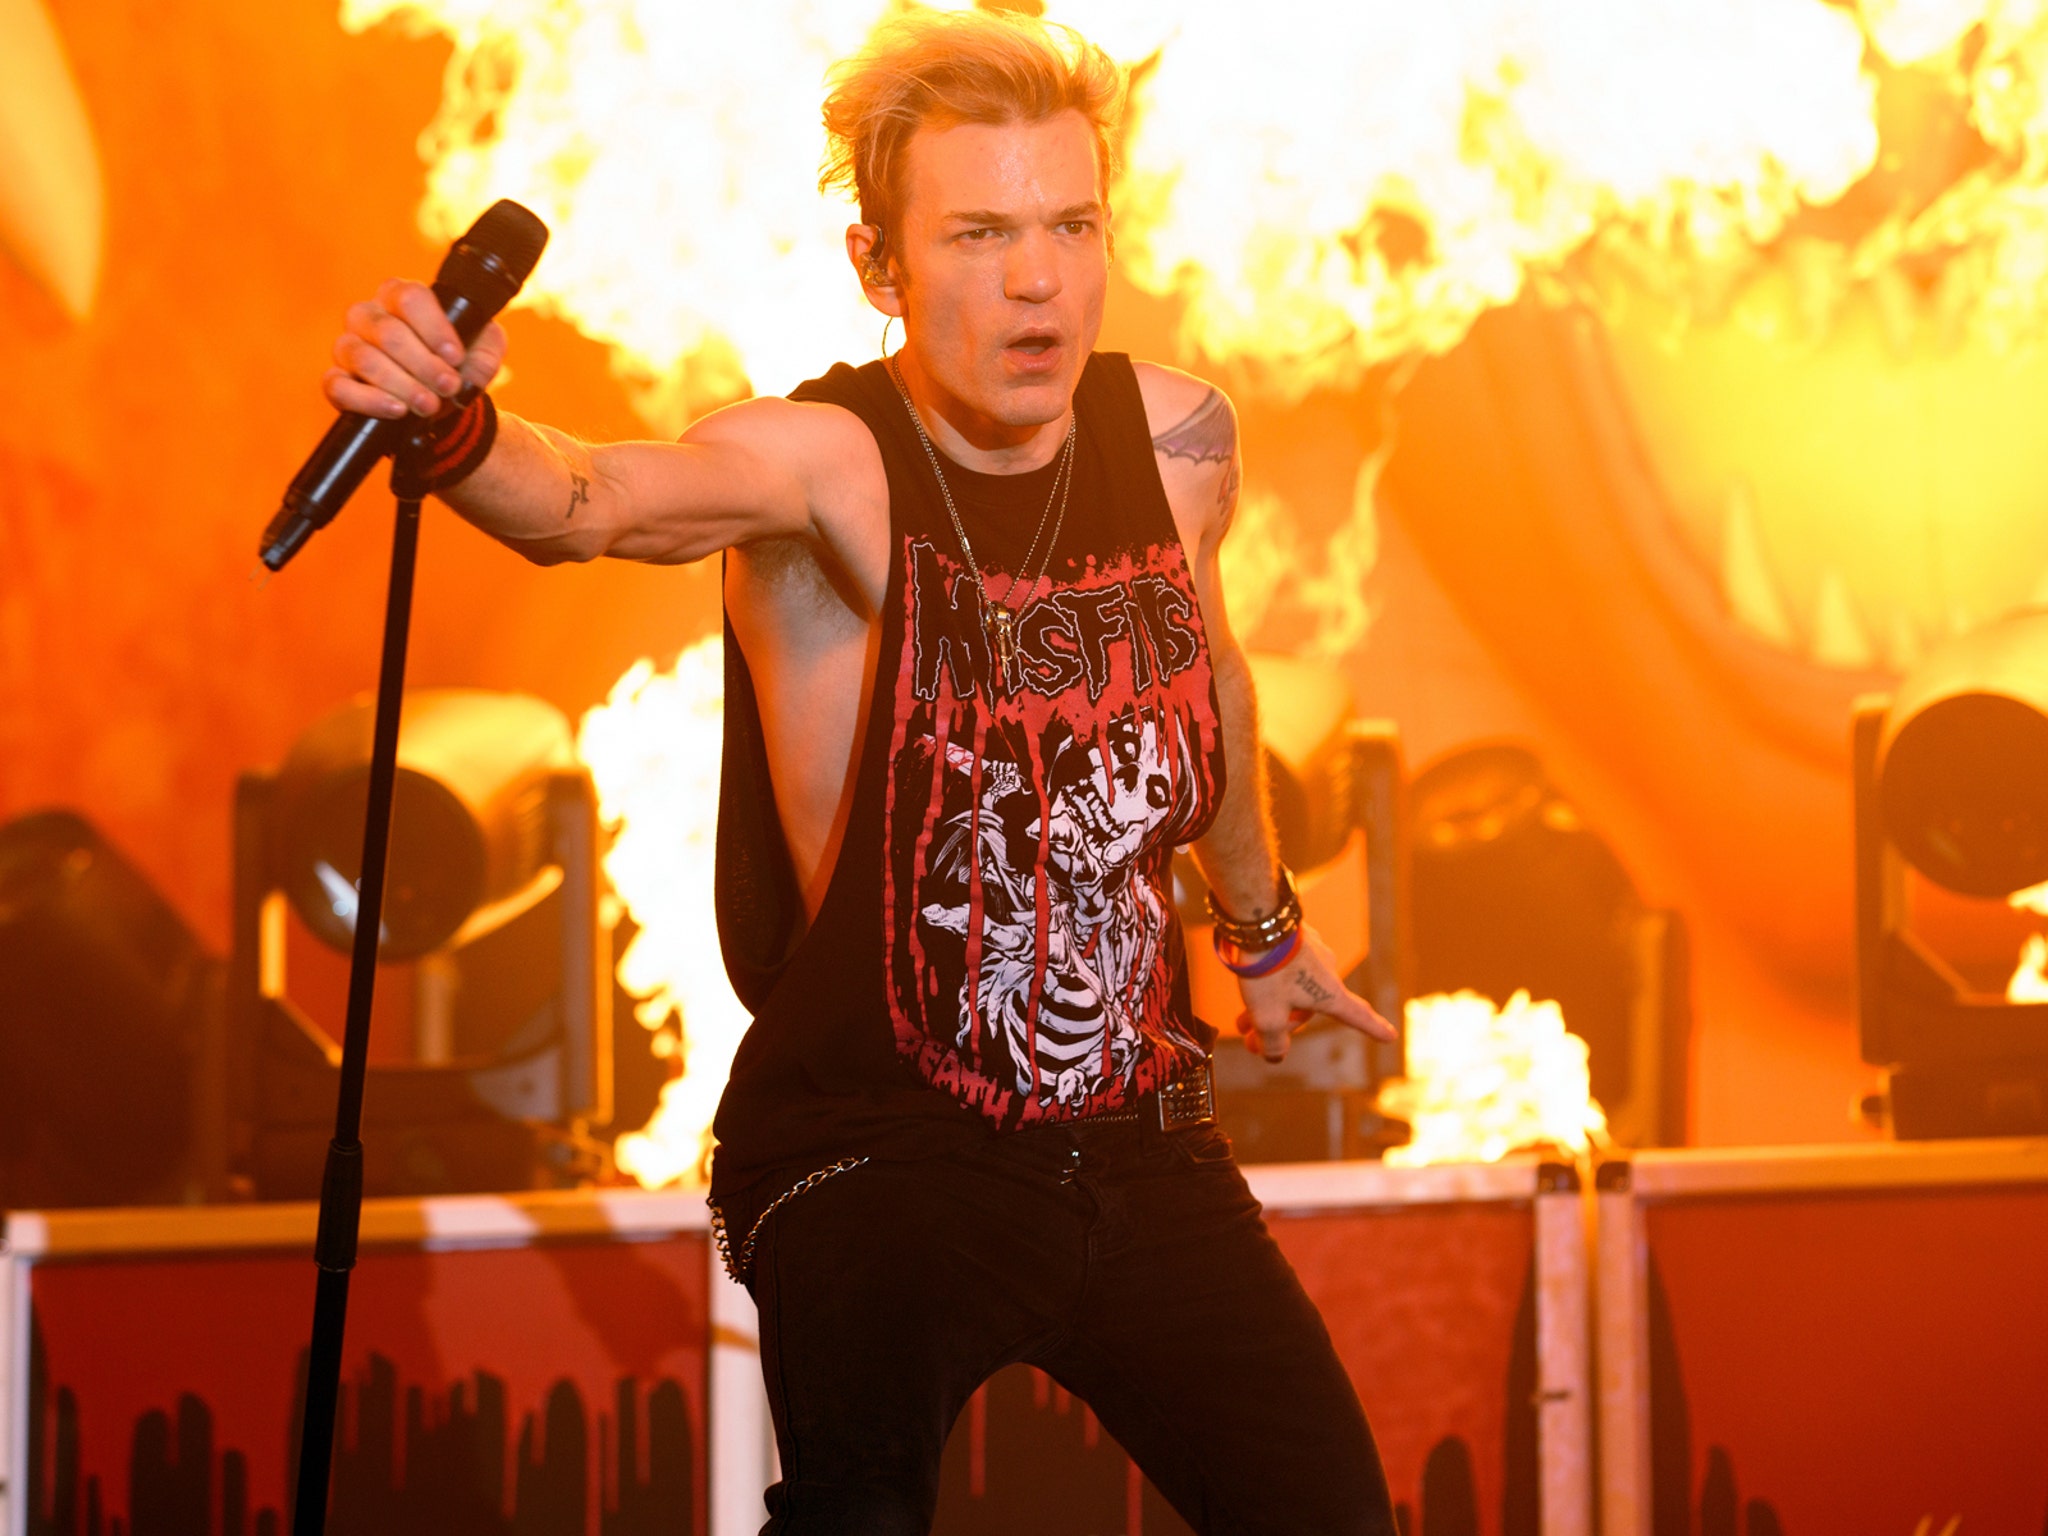 DERYCK WHIBLEY Explains Why SUM 41 Is Breaking Up